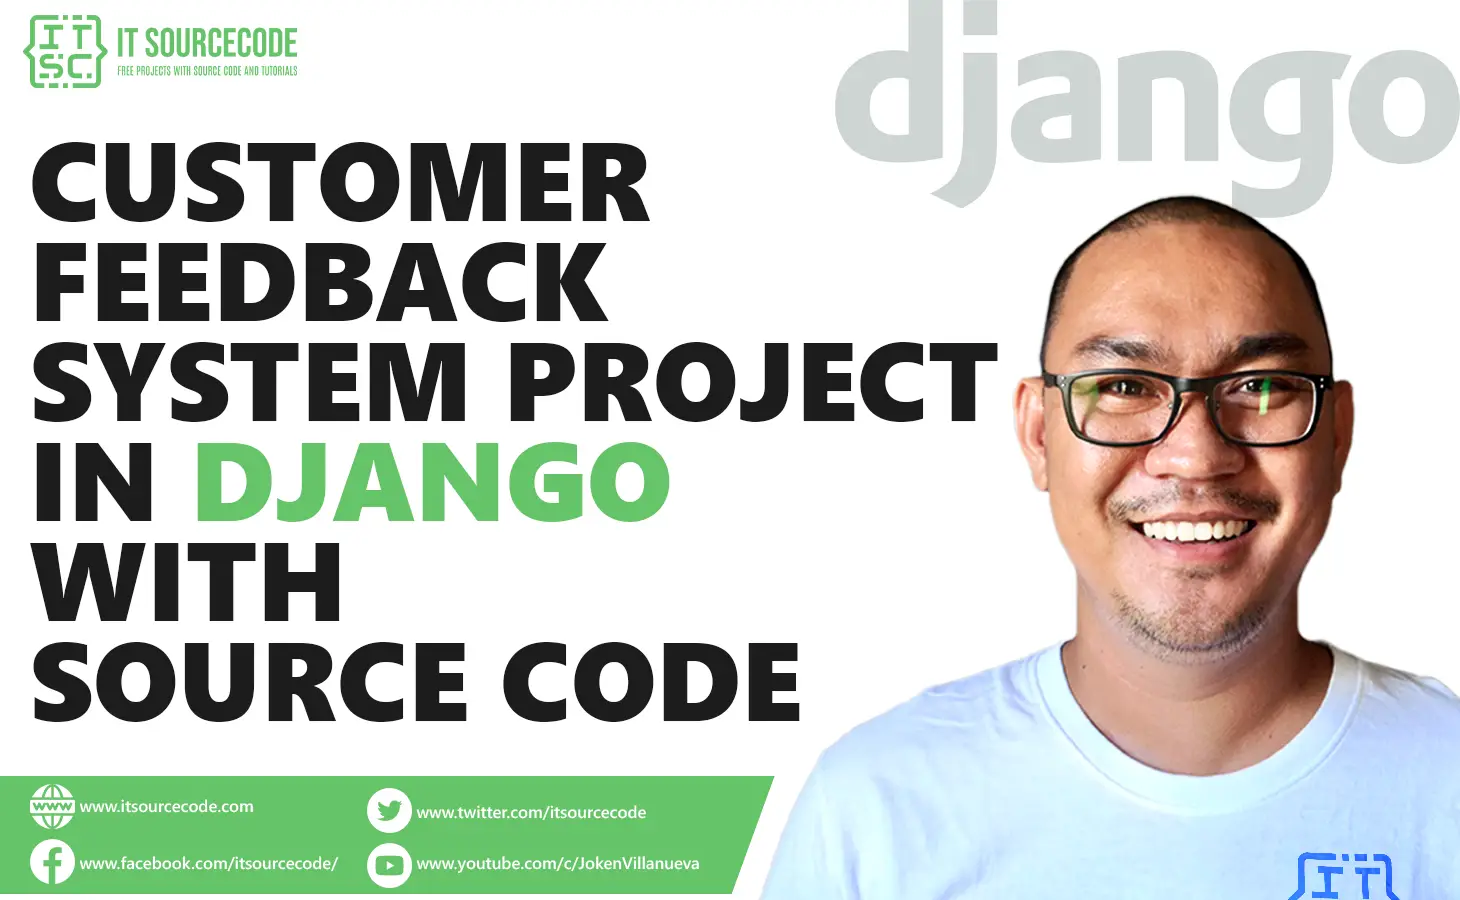 Customer Feedback System Project in Django with Source